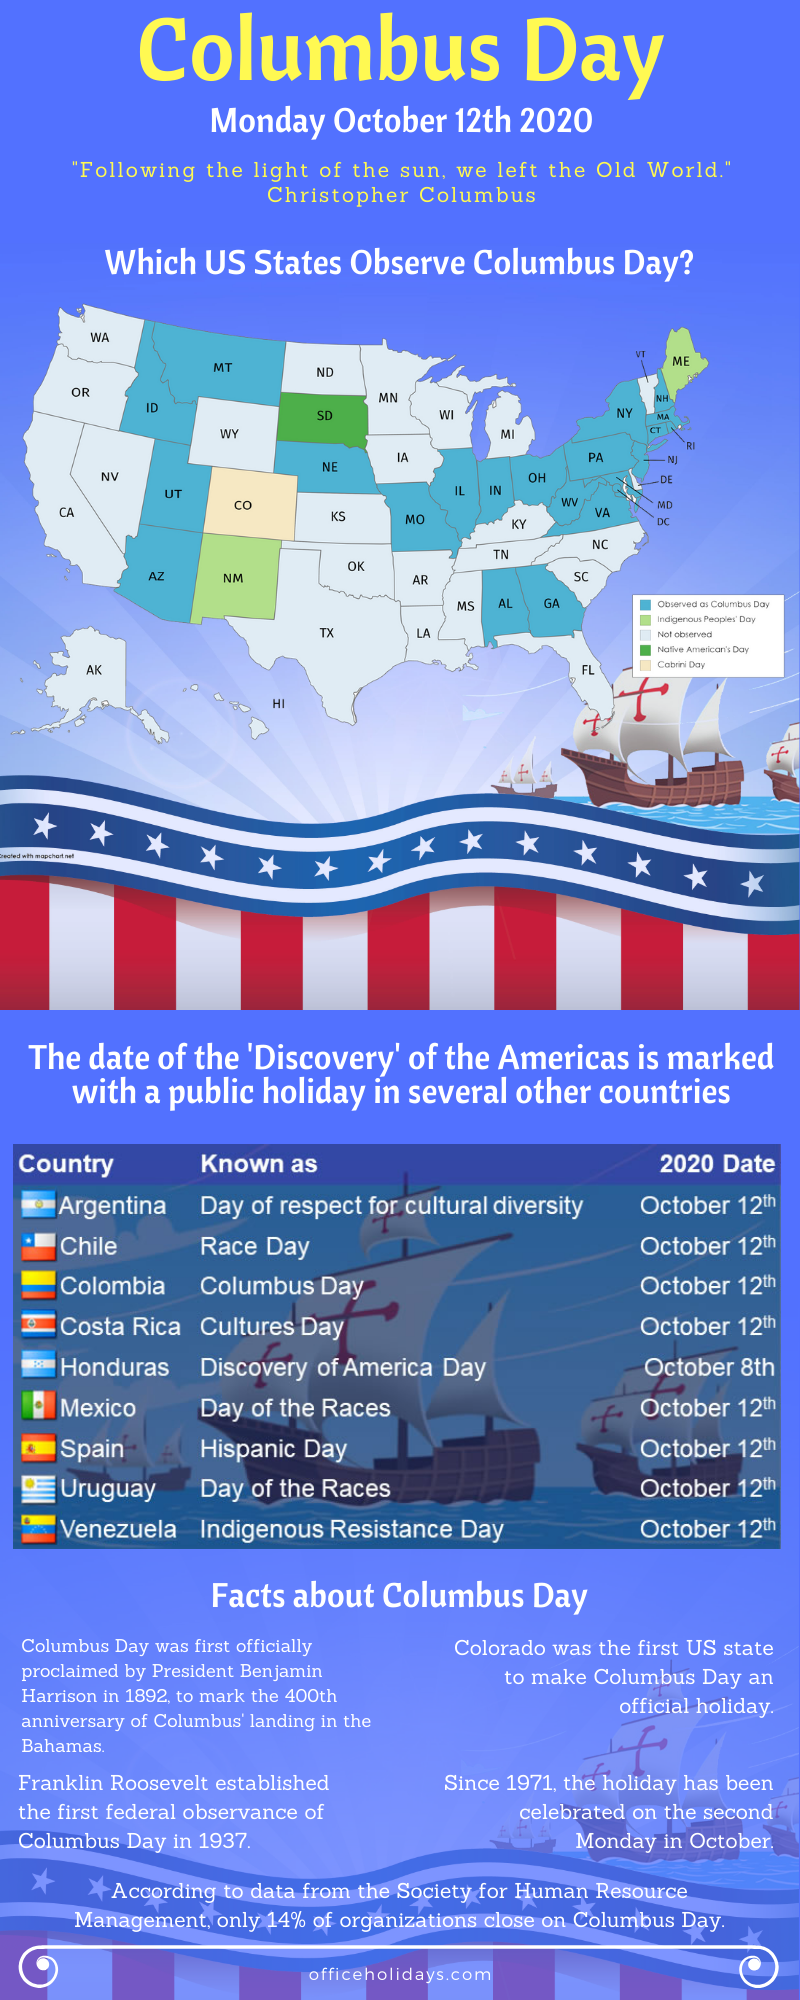 is columbus day a federal holiday in michigan